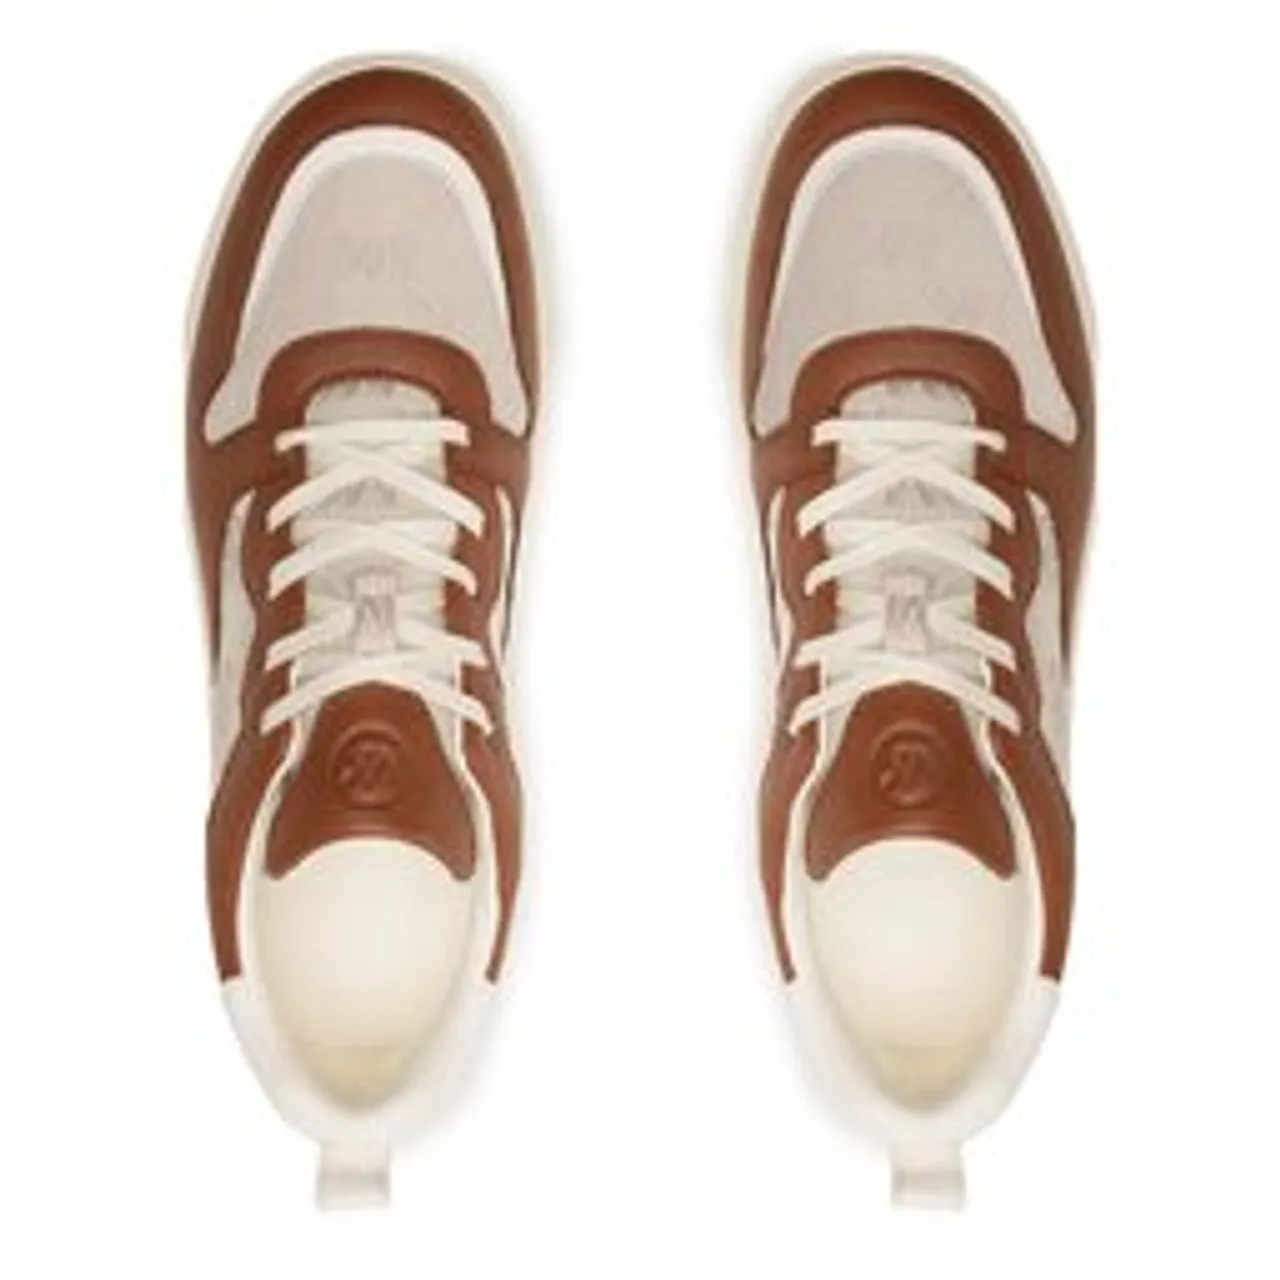 Sneakers MICHAEL Michael Kors Baxter Lace Up 42S3BAFS1Y Natural